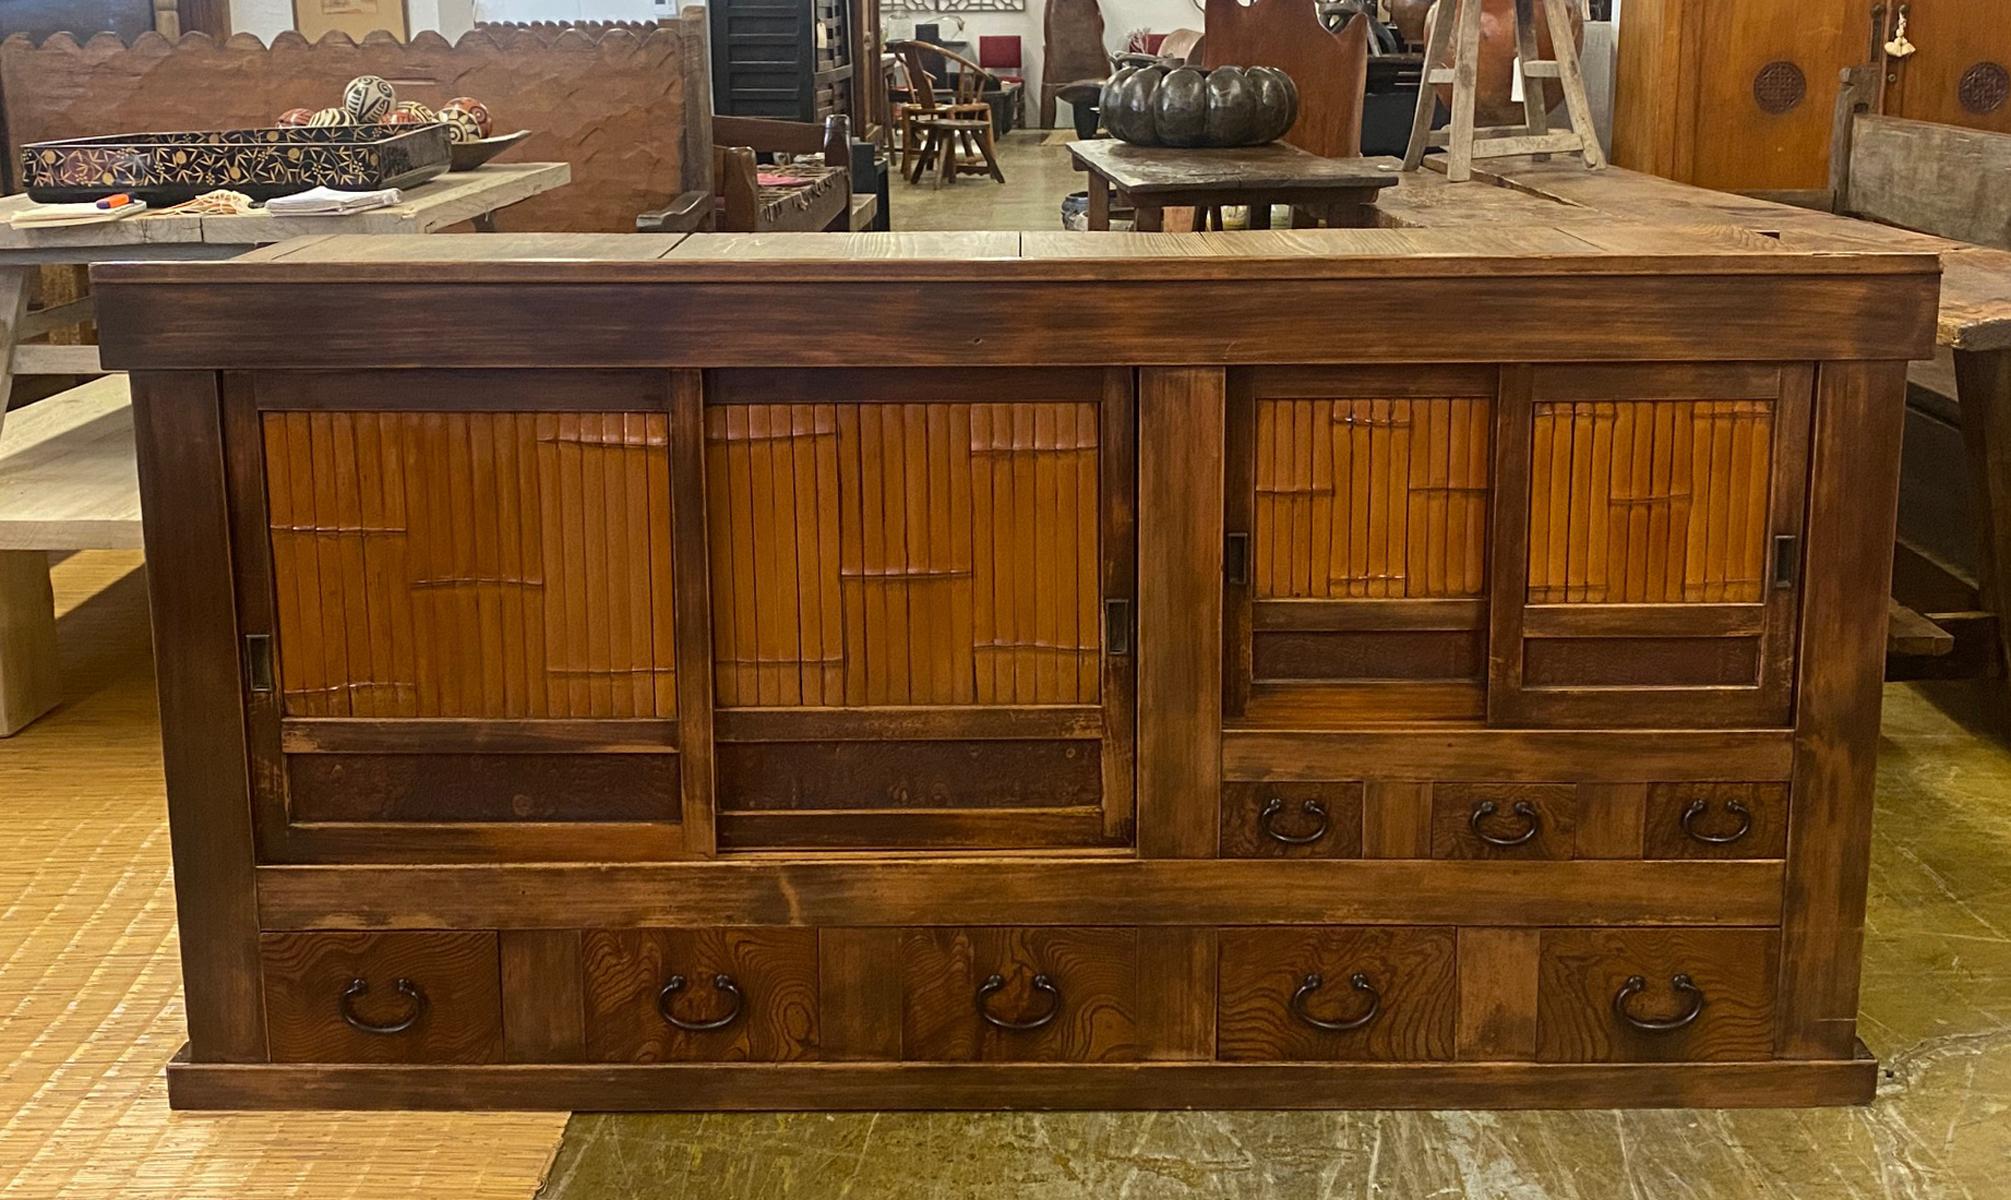 This is an upper part of a an unusual 19th century Japanese cabinet using bamboo and burled wood as design accents on the two sliding door sections and the drawers. The color of the wood variations of  rich honey .   This is a well constructed